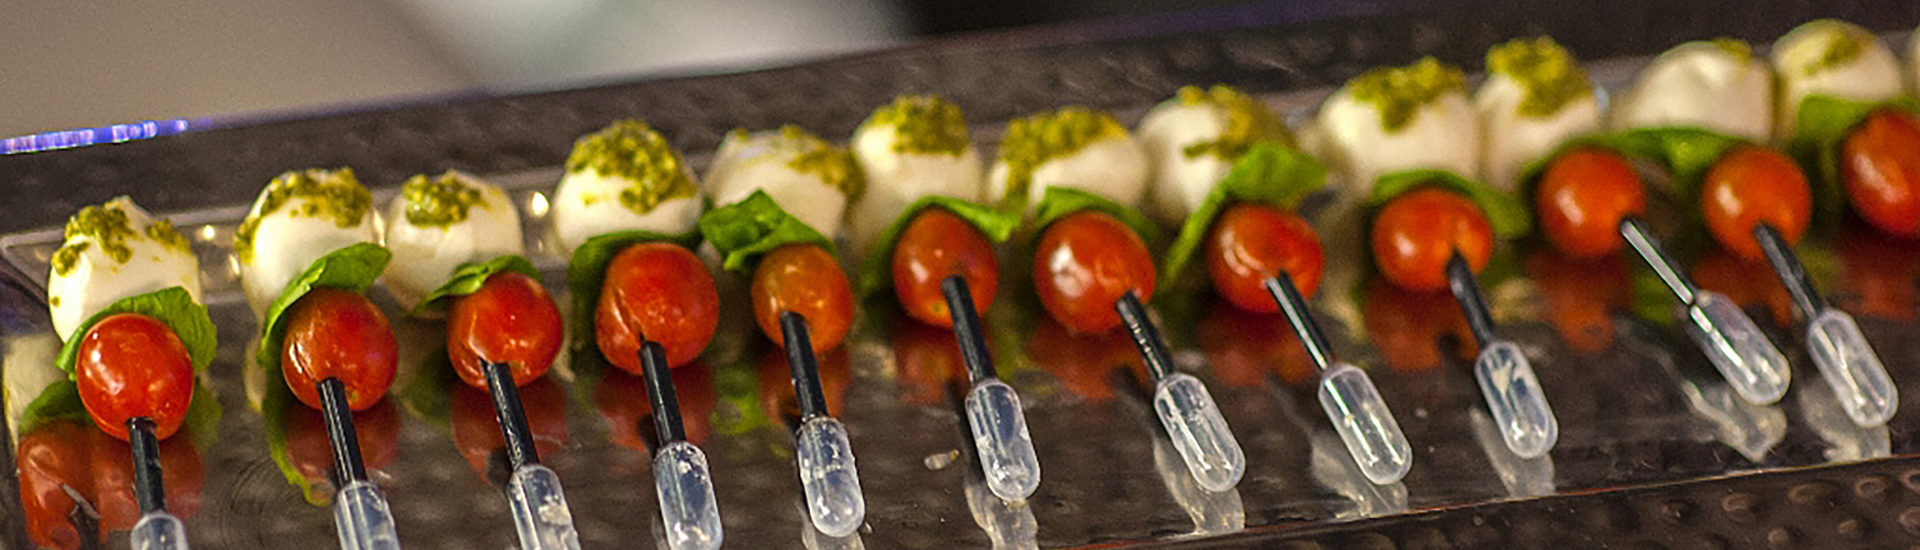 Multiple hors d'oeuvres of a piece of mozzarella ball with pesto on top, a basil leaf, cherry tomato on a plastic pipette full of balsamic vinegar.